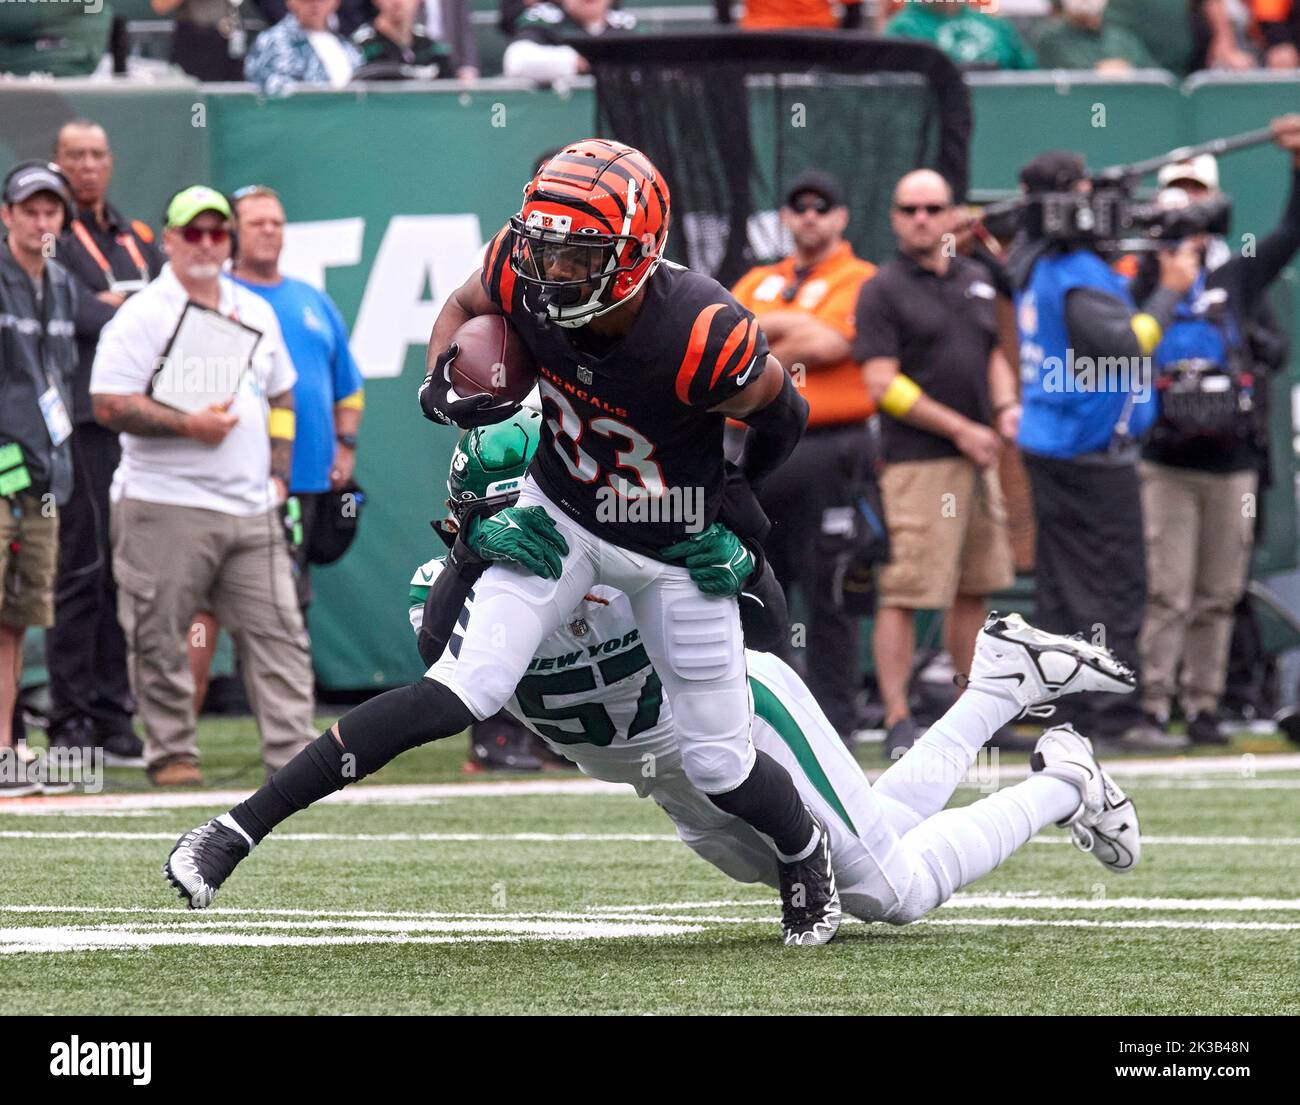 East Rutherford, New Jersey, USA. 26th Sep, 2022. Cincinnati Bengals wide receiver Tyler Boyd (83) is tackled by New York Jets linebacker C.J. Mosley (57) during a NFL game at MetLife Stadium in East Rutherford, New Jersey on Sunday September 25, 2022. Cincinnati Bengals defeated the New York Jets 27-12. Duncan Williams/CSM/Alamy Live News Stock Photo